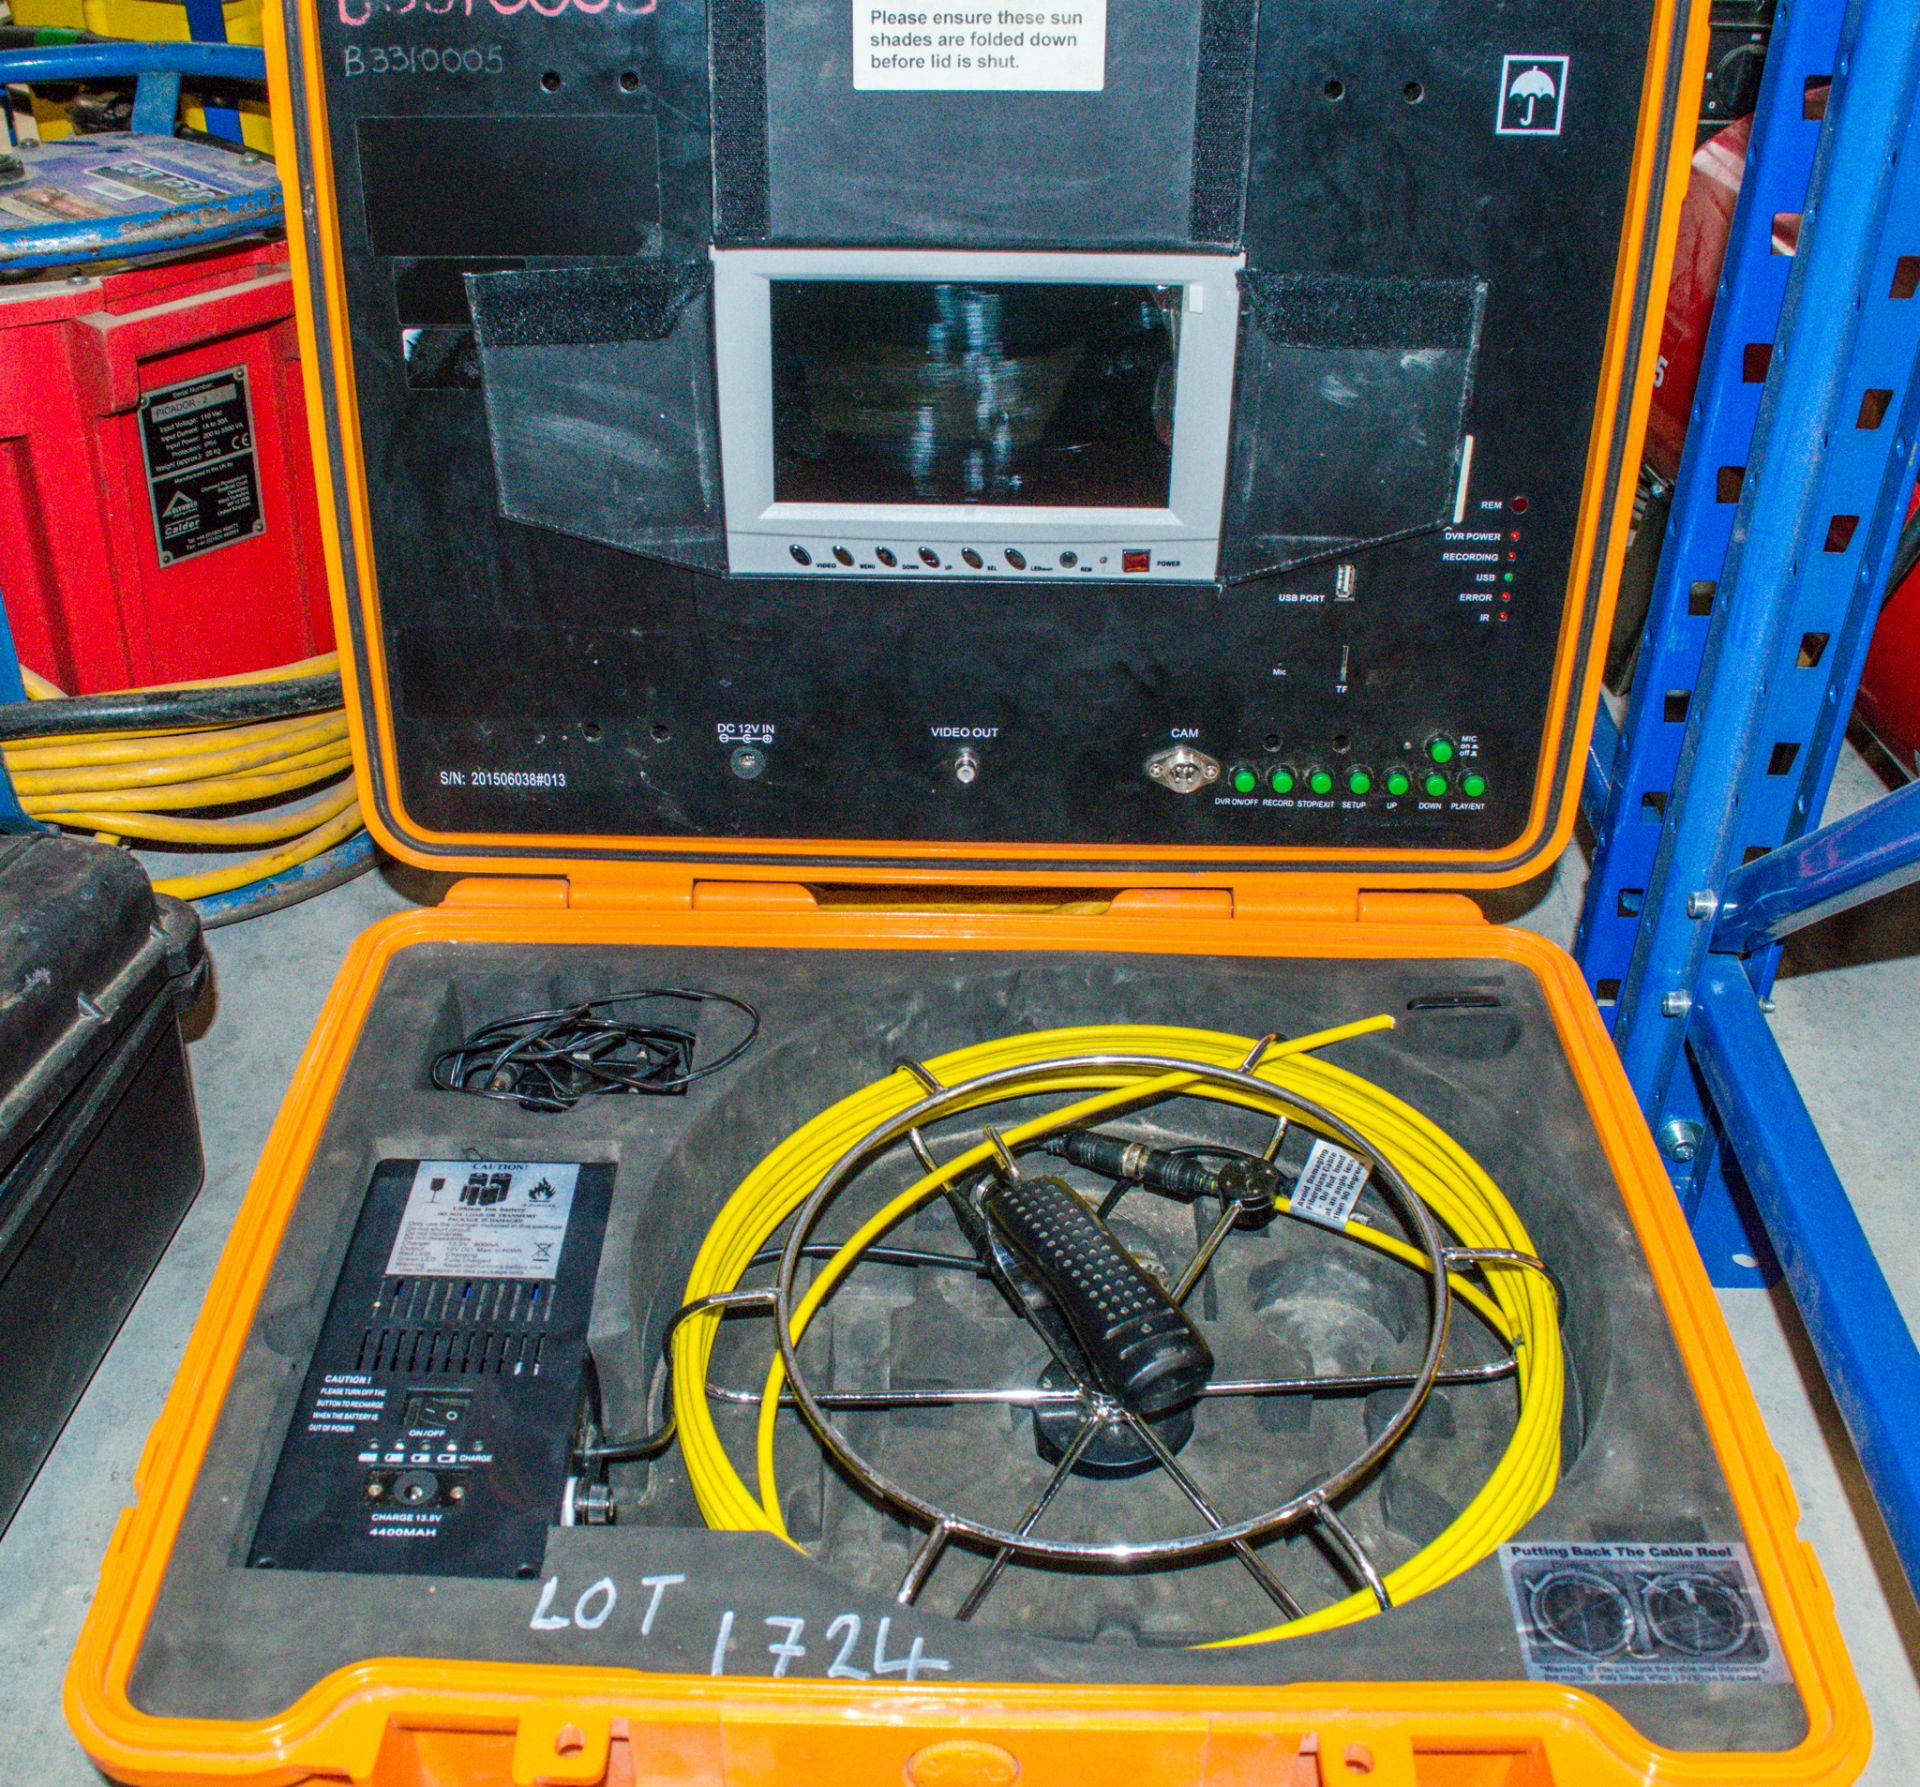 Pipe & wall cobra wheel inspection camera system c/w charger, camera & carry case with DVR feature